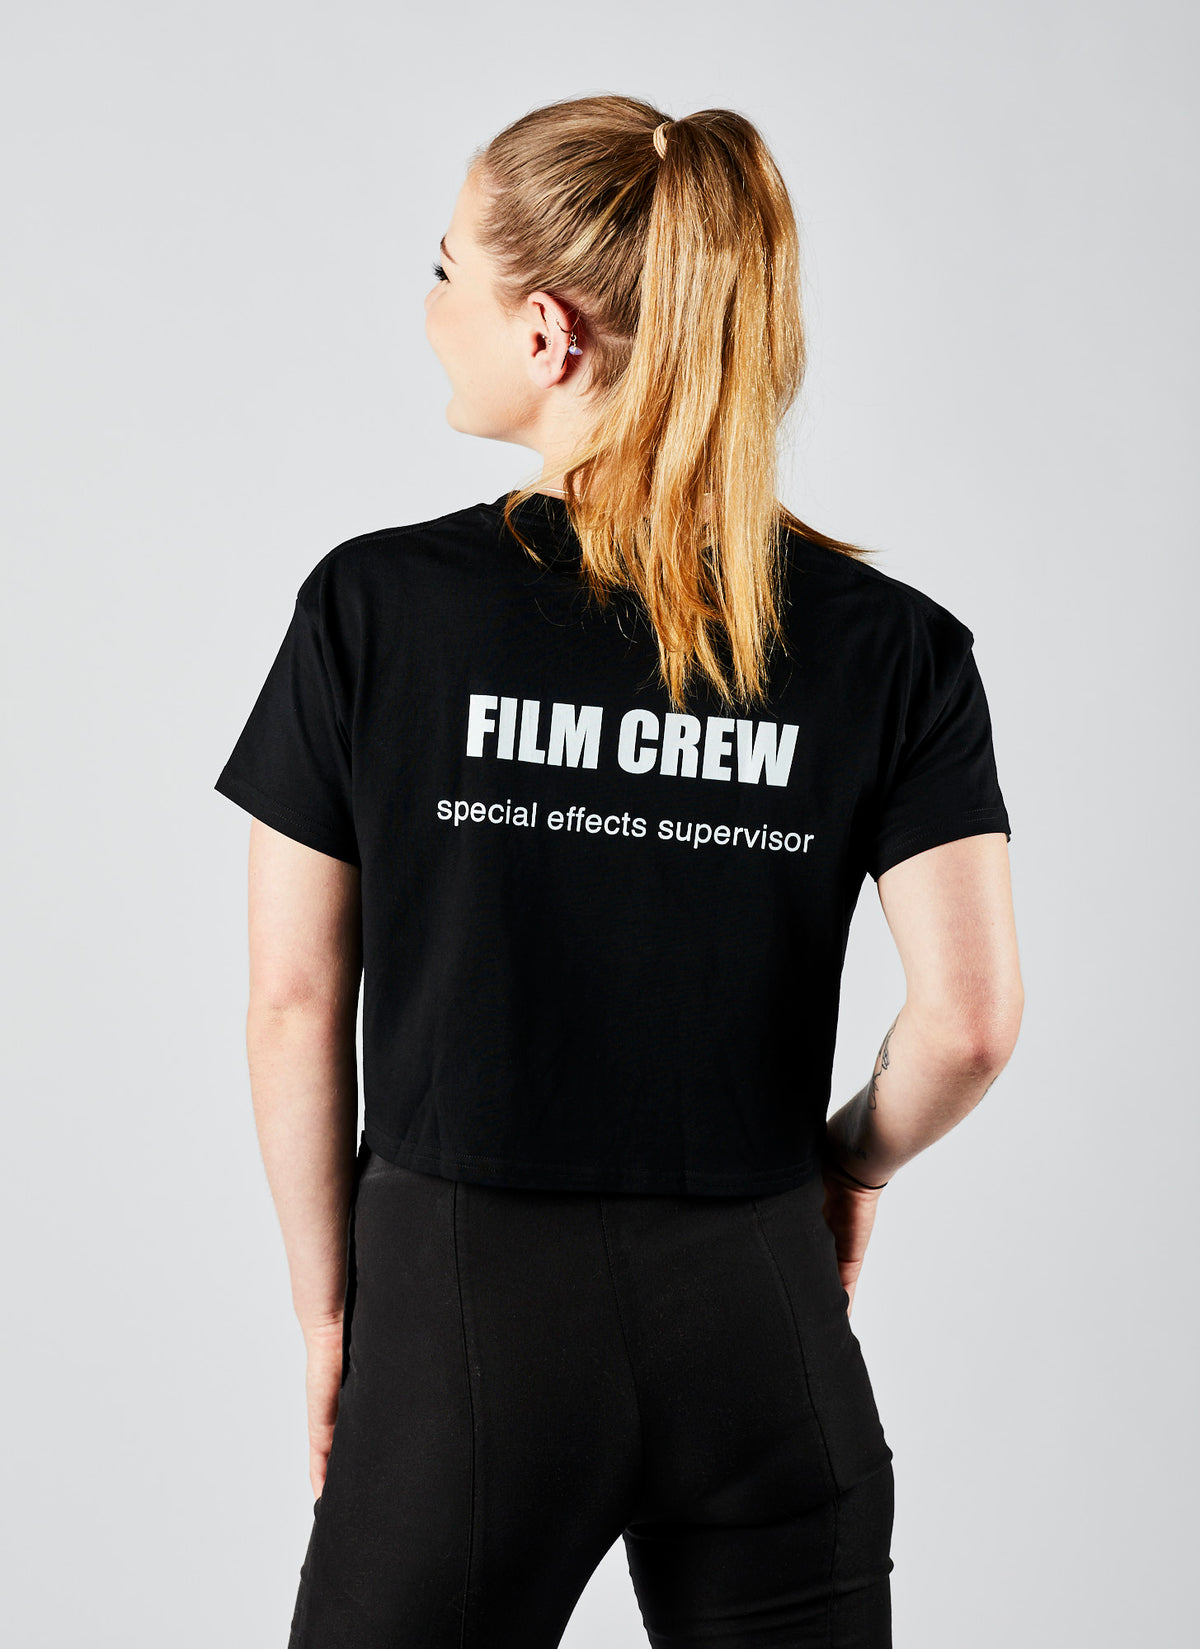 Reverse angle of a long-haired woman wearing a cropped black film crew shirt with &quot;Special Effects Supervisor&quot; printed on the back